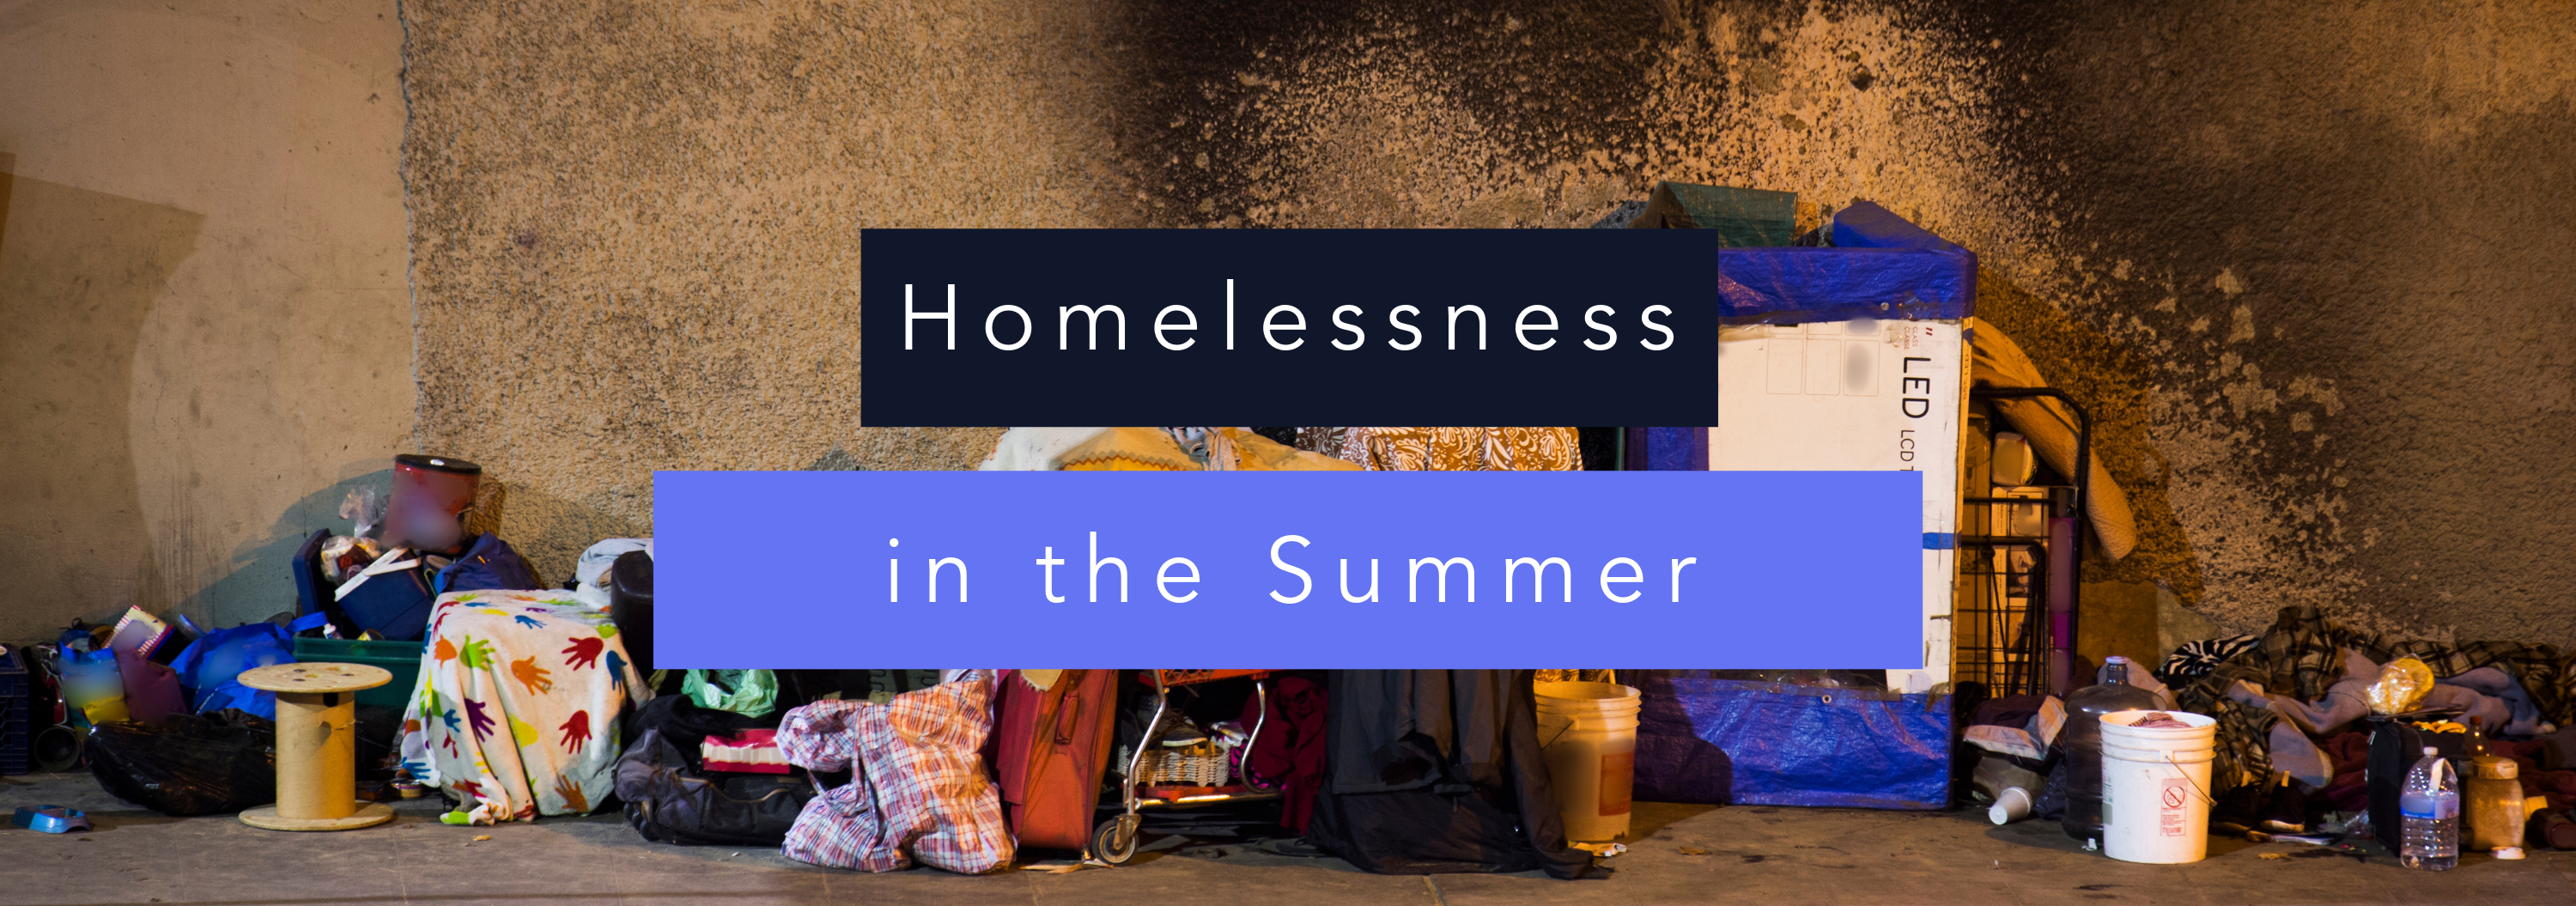 Homelessness in the Summer